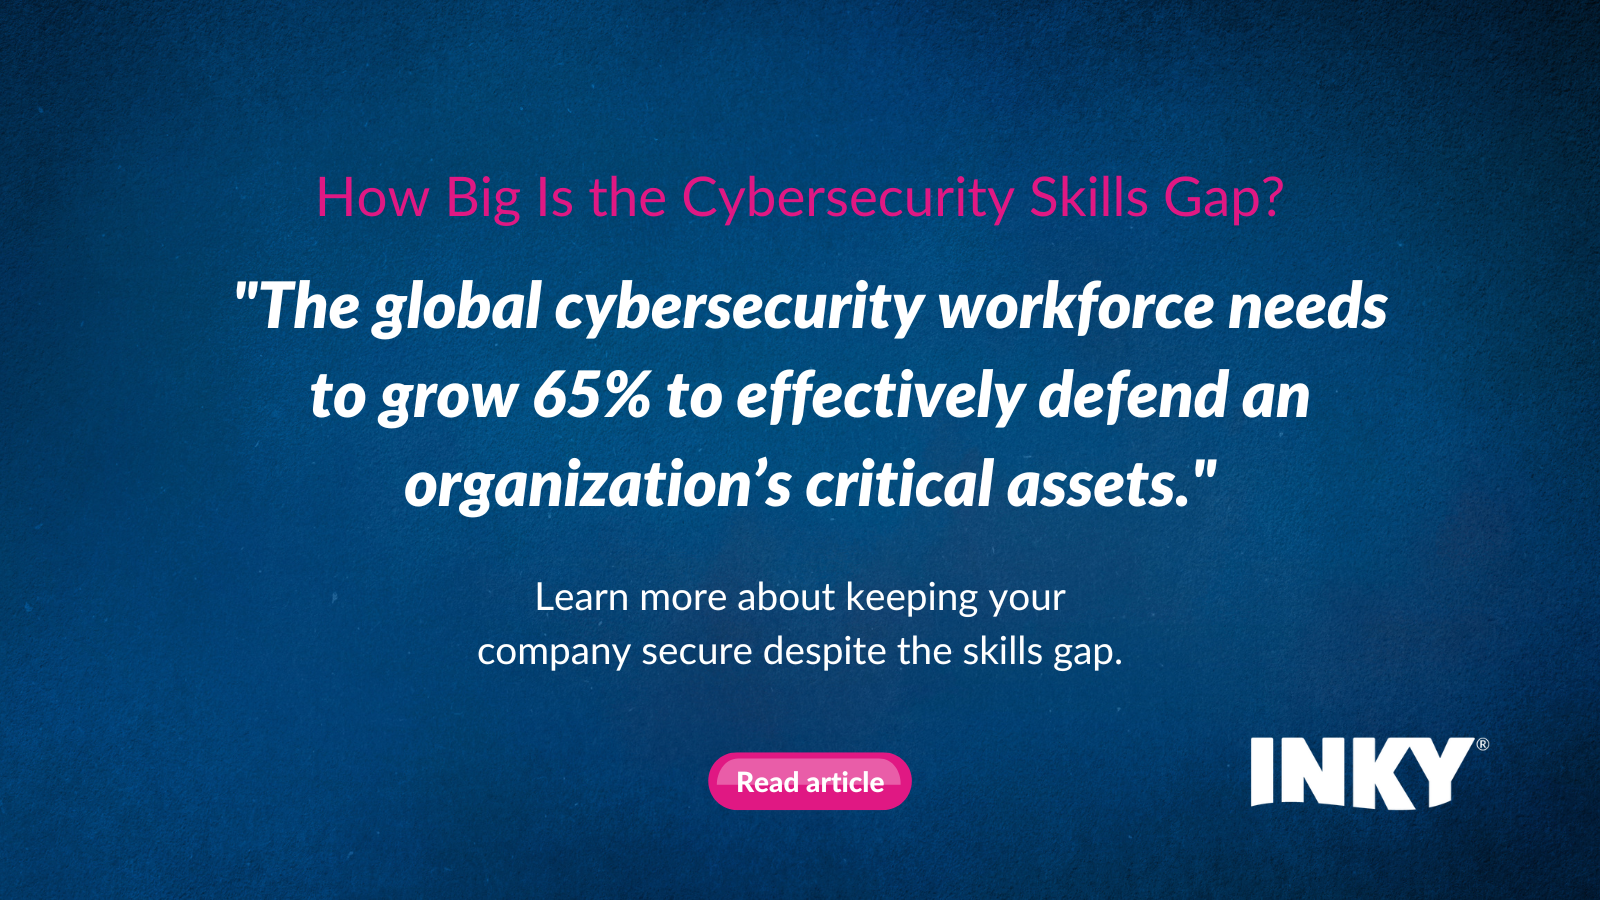 Staying Secure Despite the Skills Gap in Cybersecurity